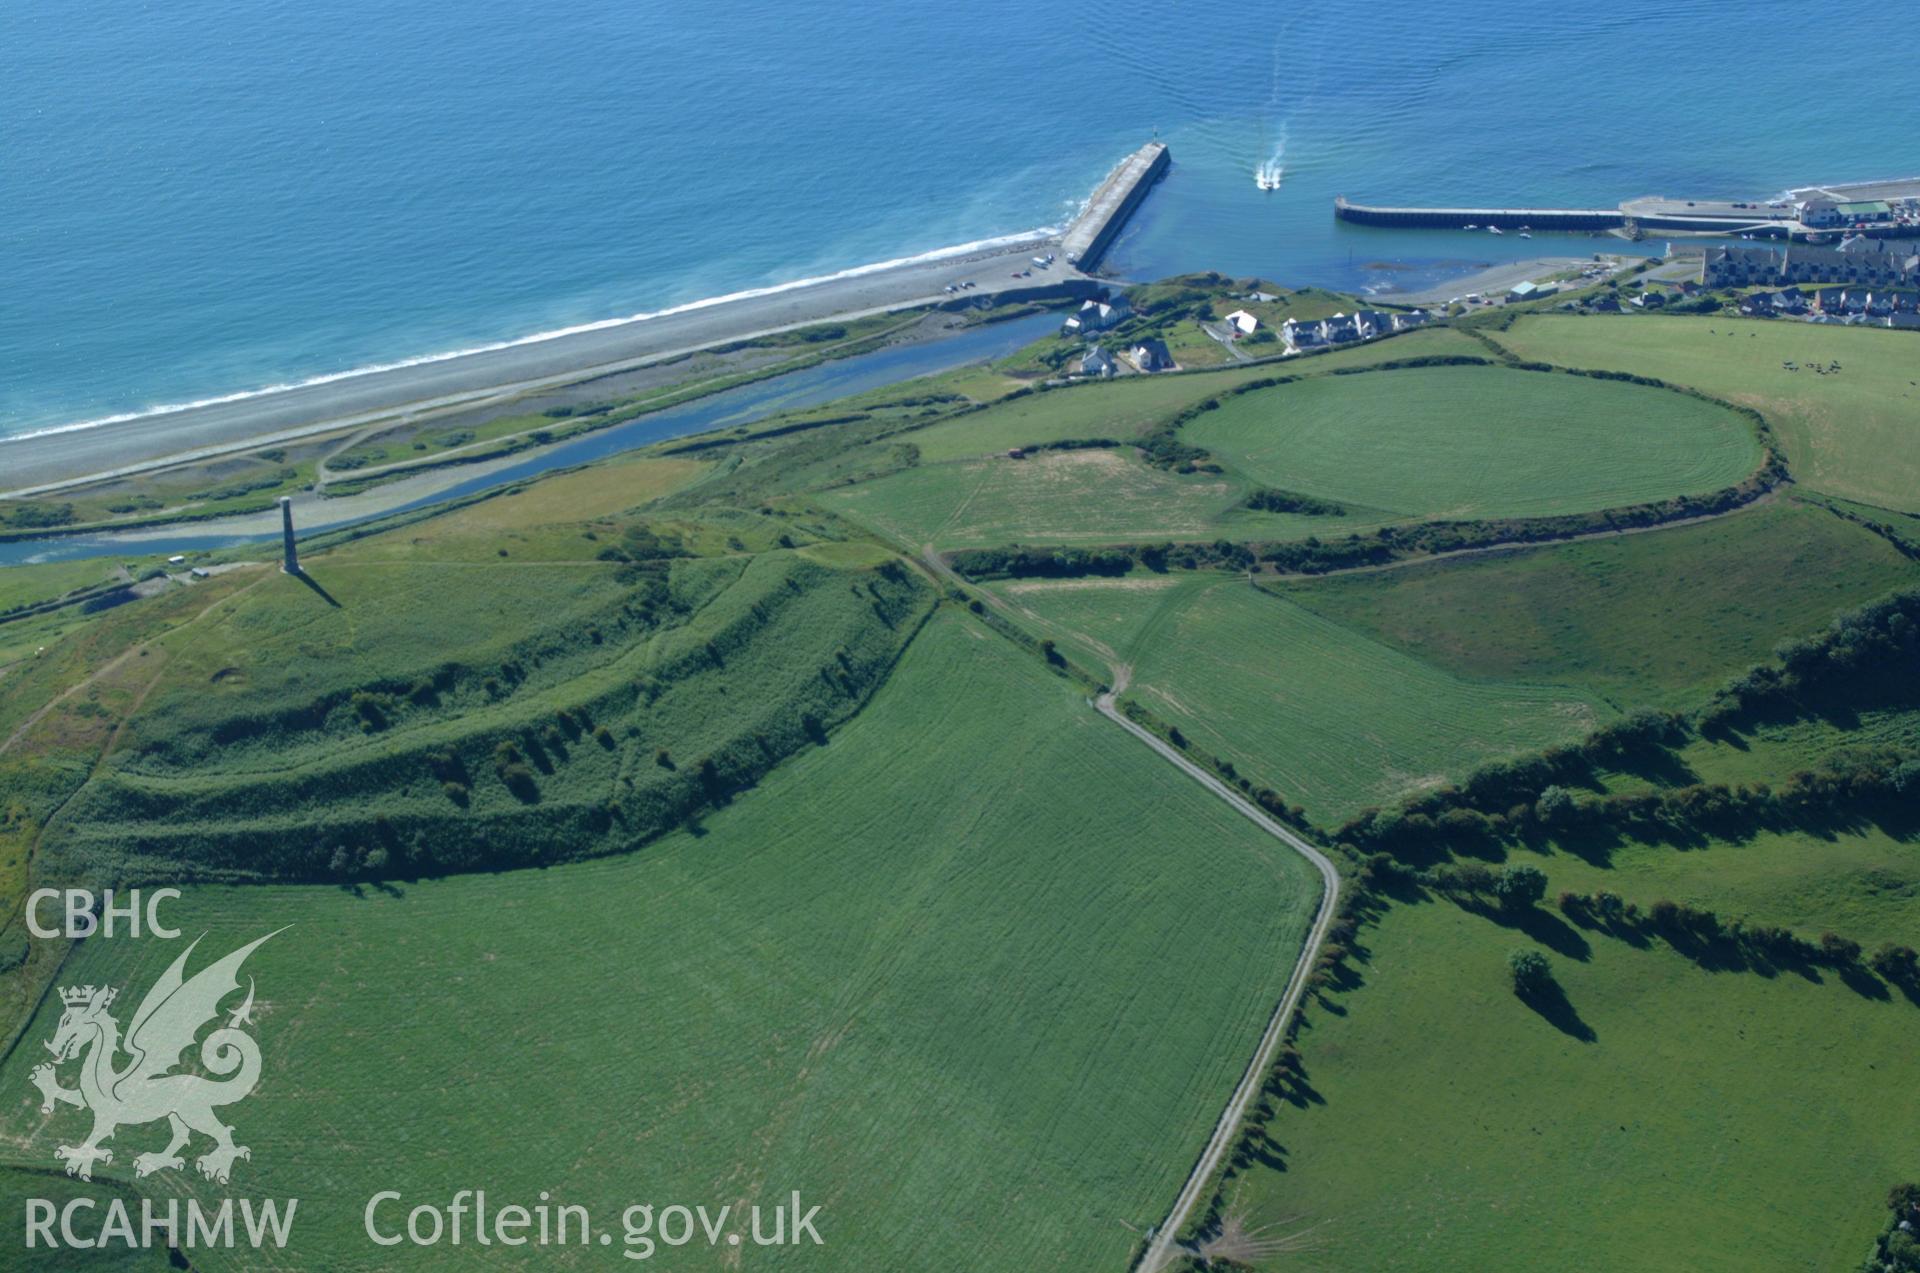 RCAHMW colour oblique aerial photograph of Pen Dinas Hillfort, Aberystwyth taken on 14/06/2004 by Toby Driver